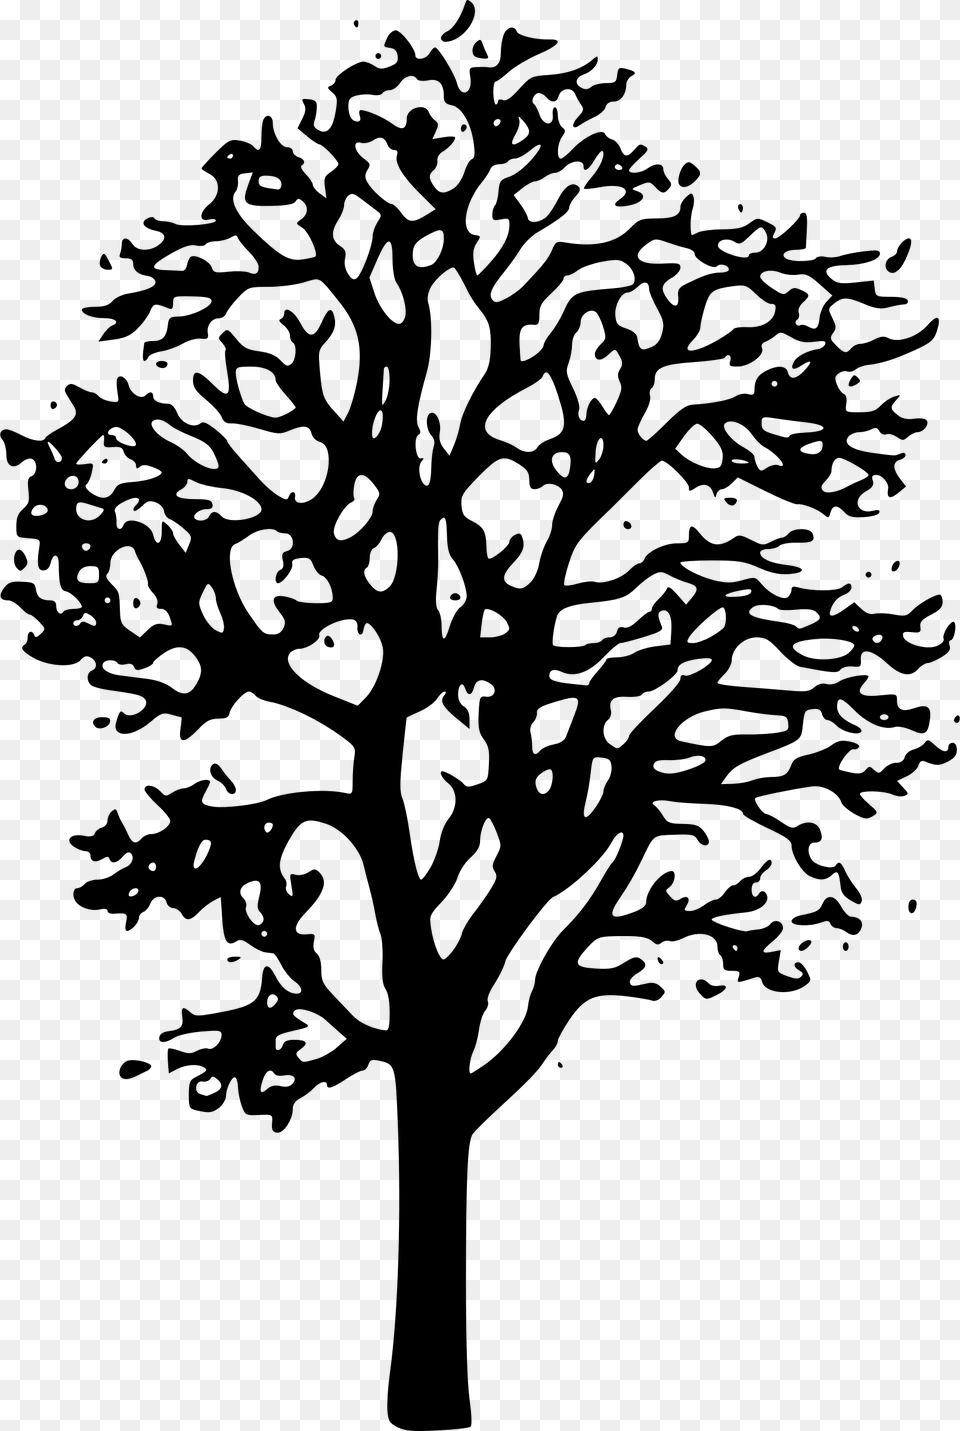 Maple Tree Clip Arts Tree Clipart Black And White Transparent, Gray Png Image